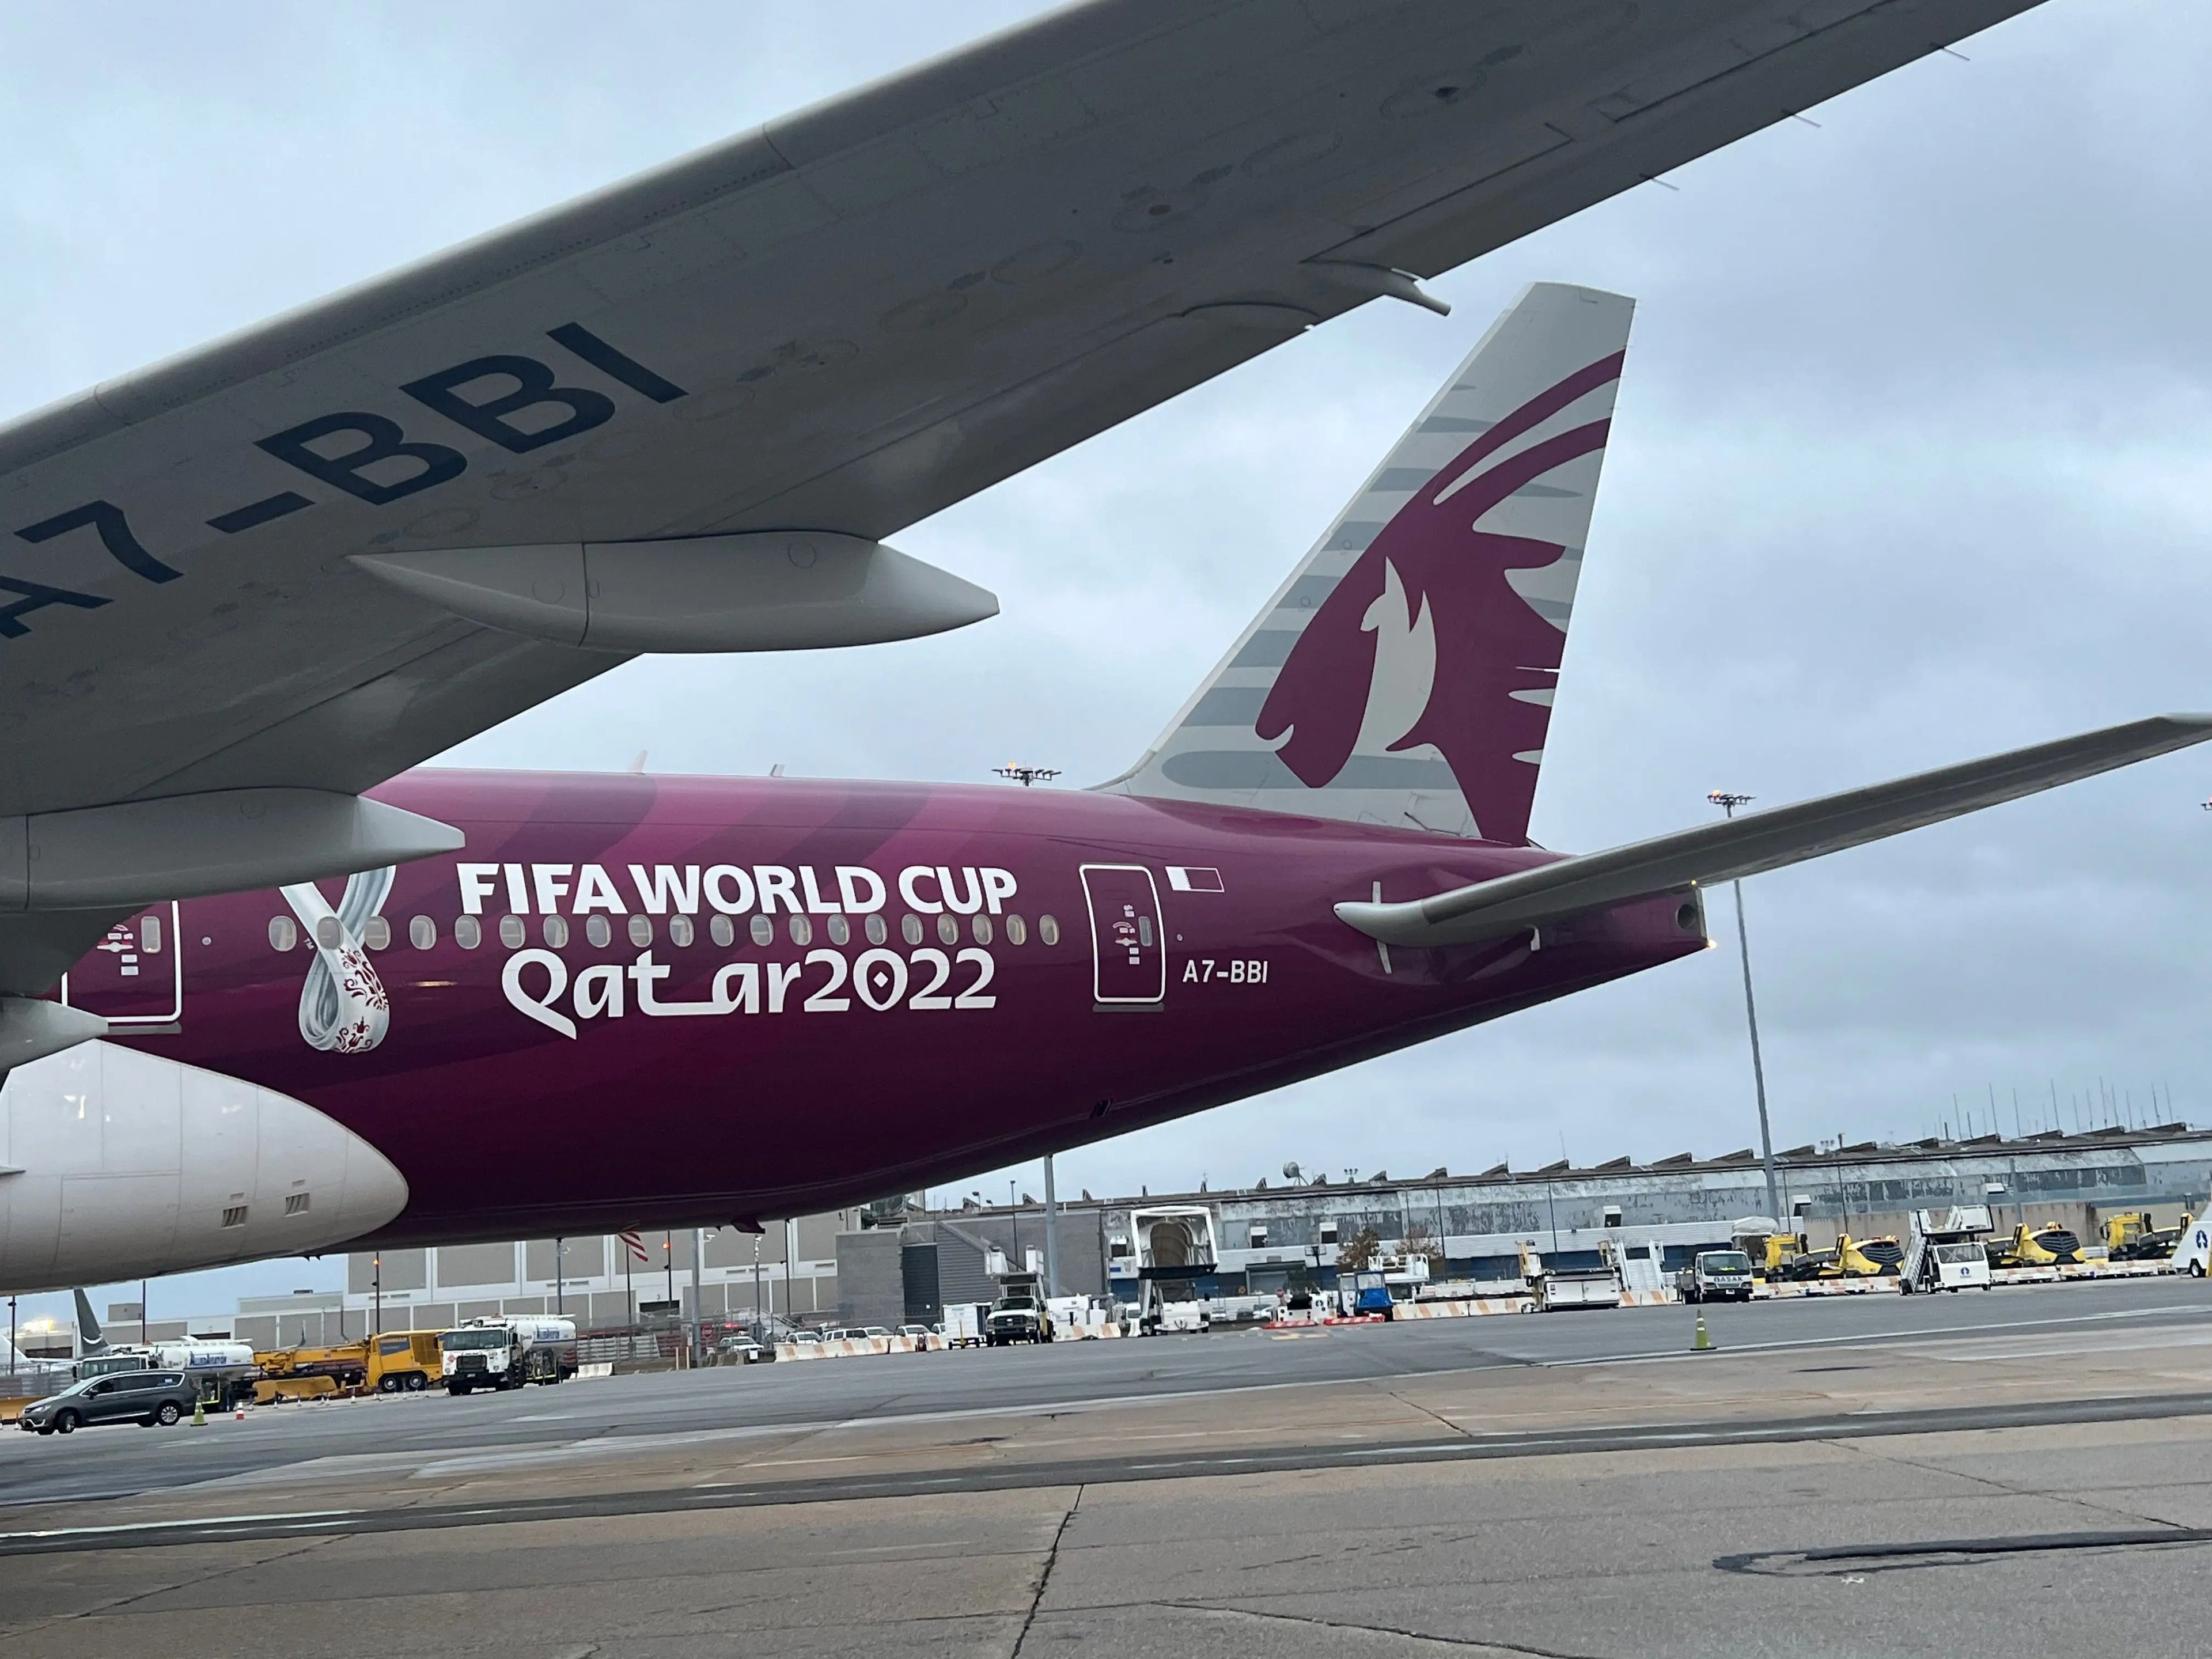 Qatar's special FIFA livery on its Boeing 777-200LR.